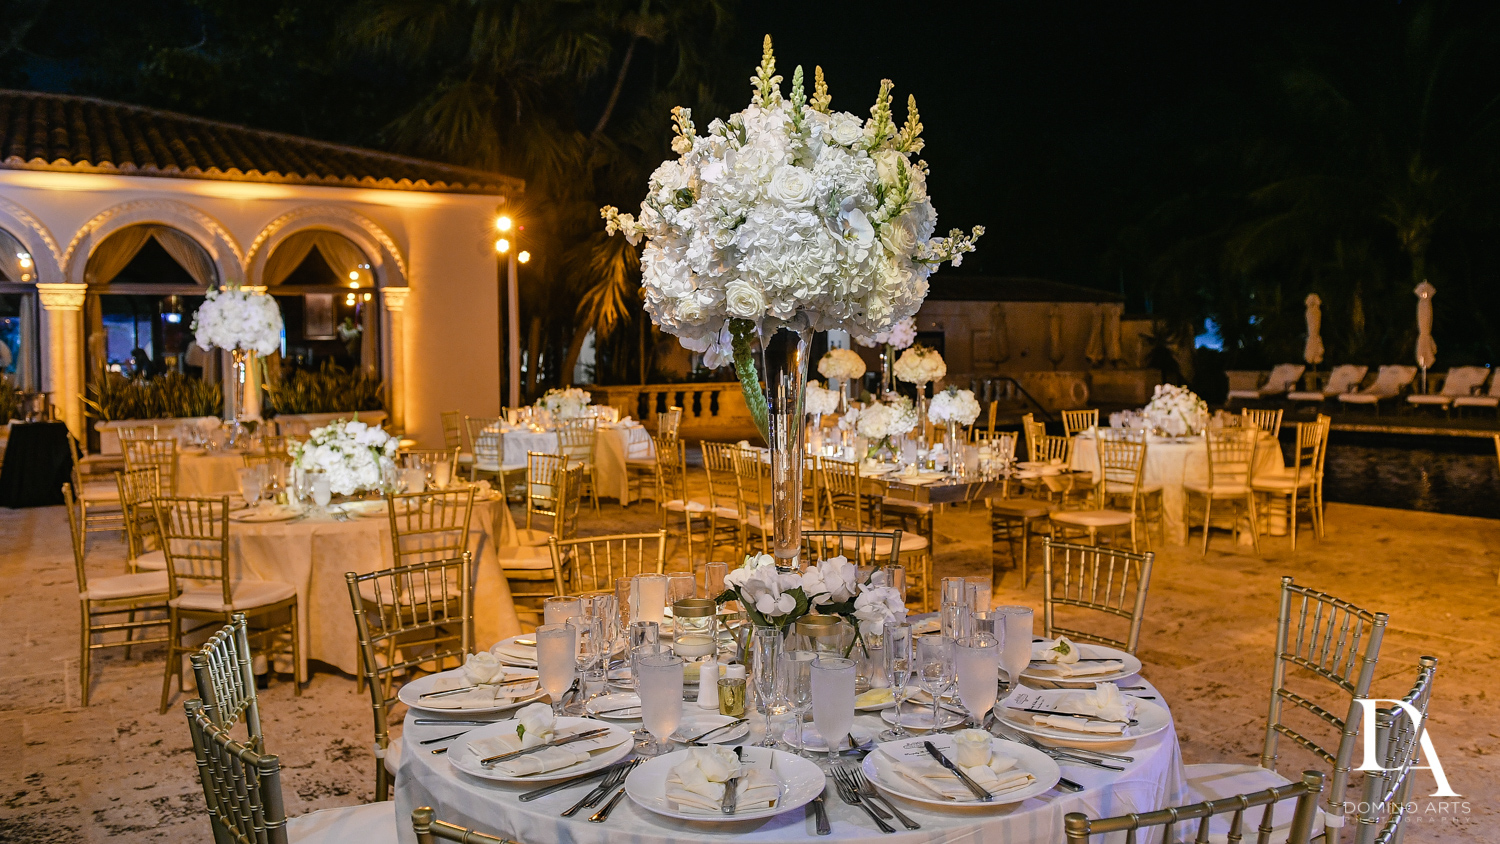 decor at Classic & Elegant Wedding at Fisher Island Miami by Domino arts Photography 